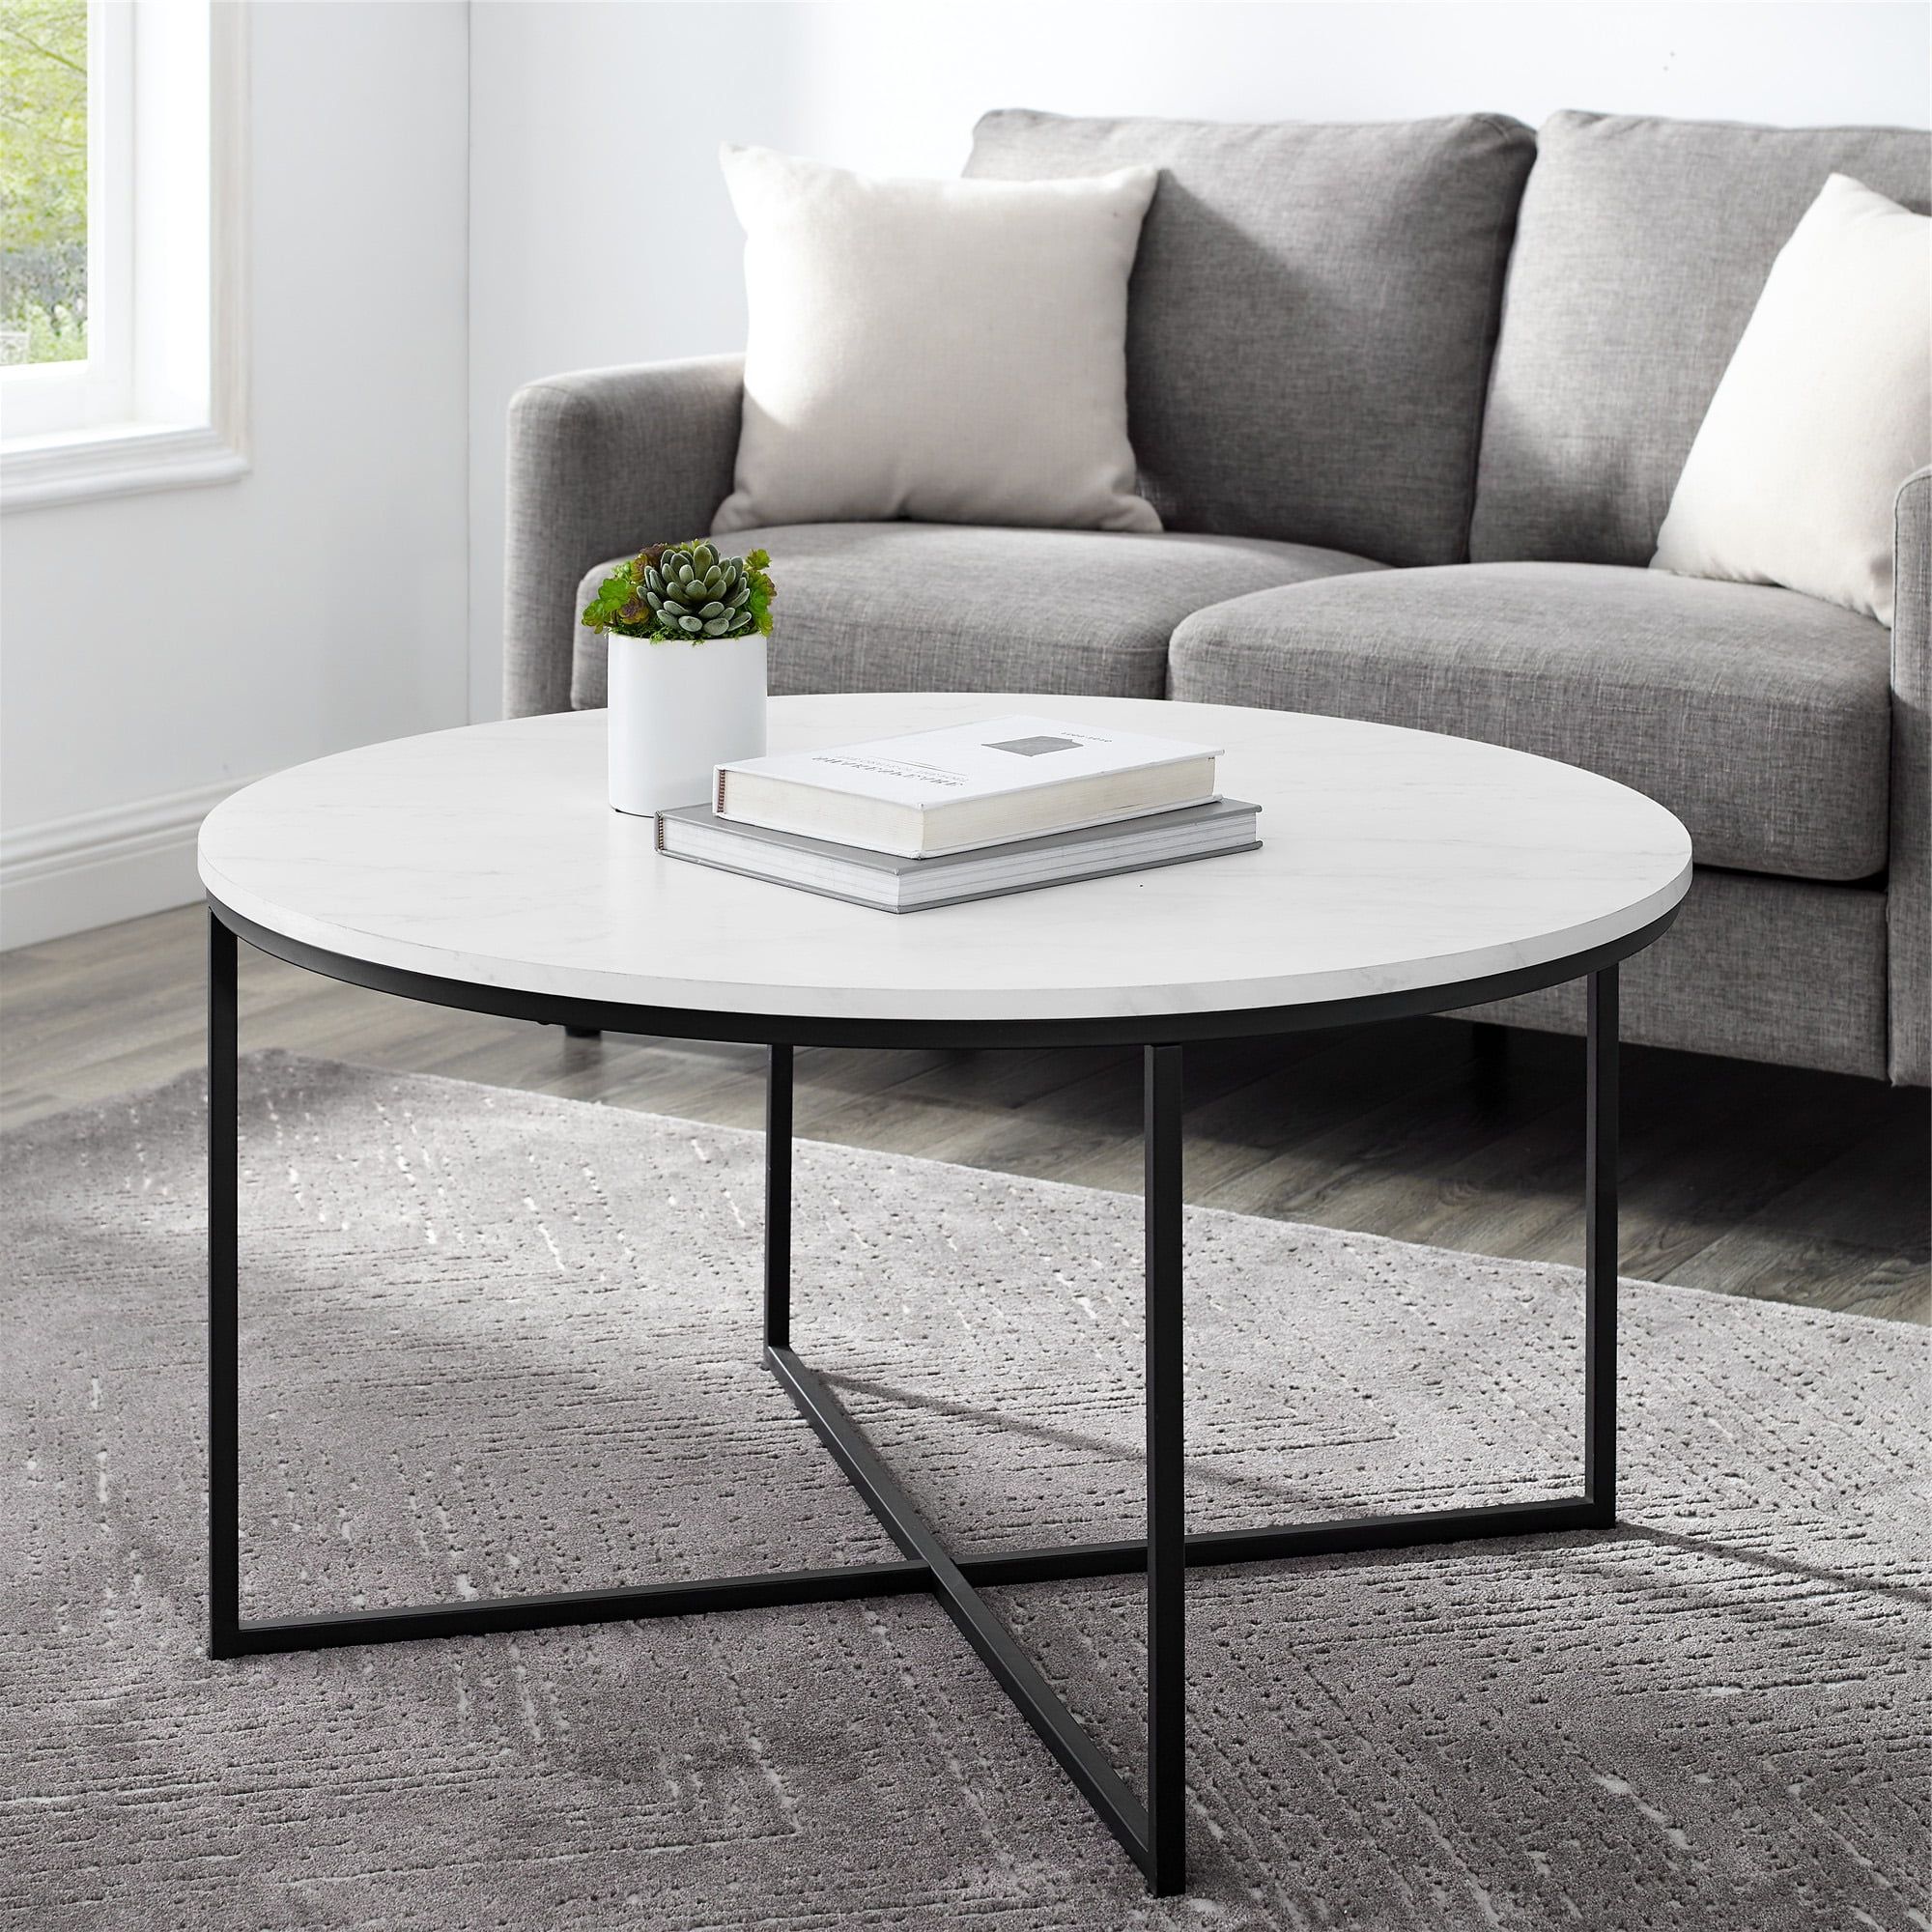 Ember Interiors Modern Round Coffee Table, White Faux Marble/black Pertaining To Trendy Modern Round Faux Marble Coffee Tables (View 4 of 15)